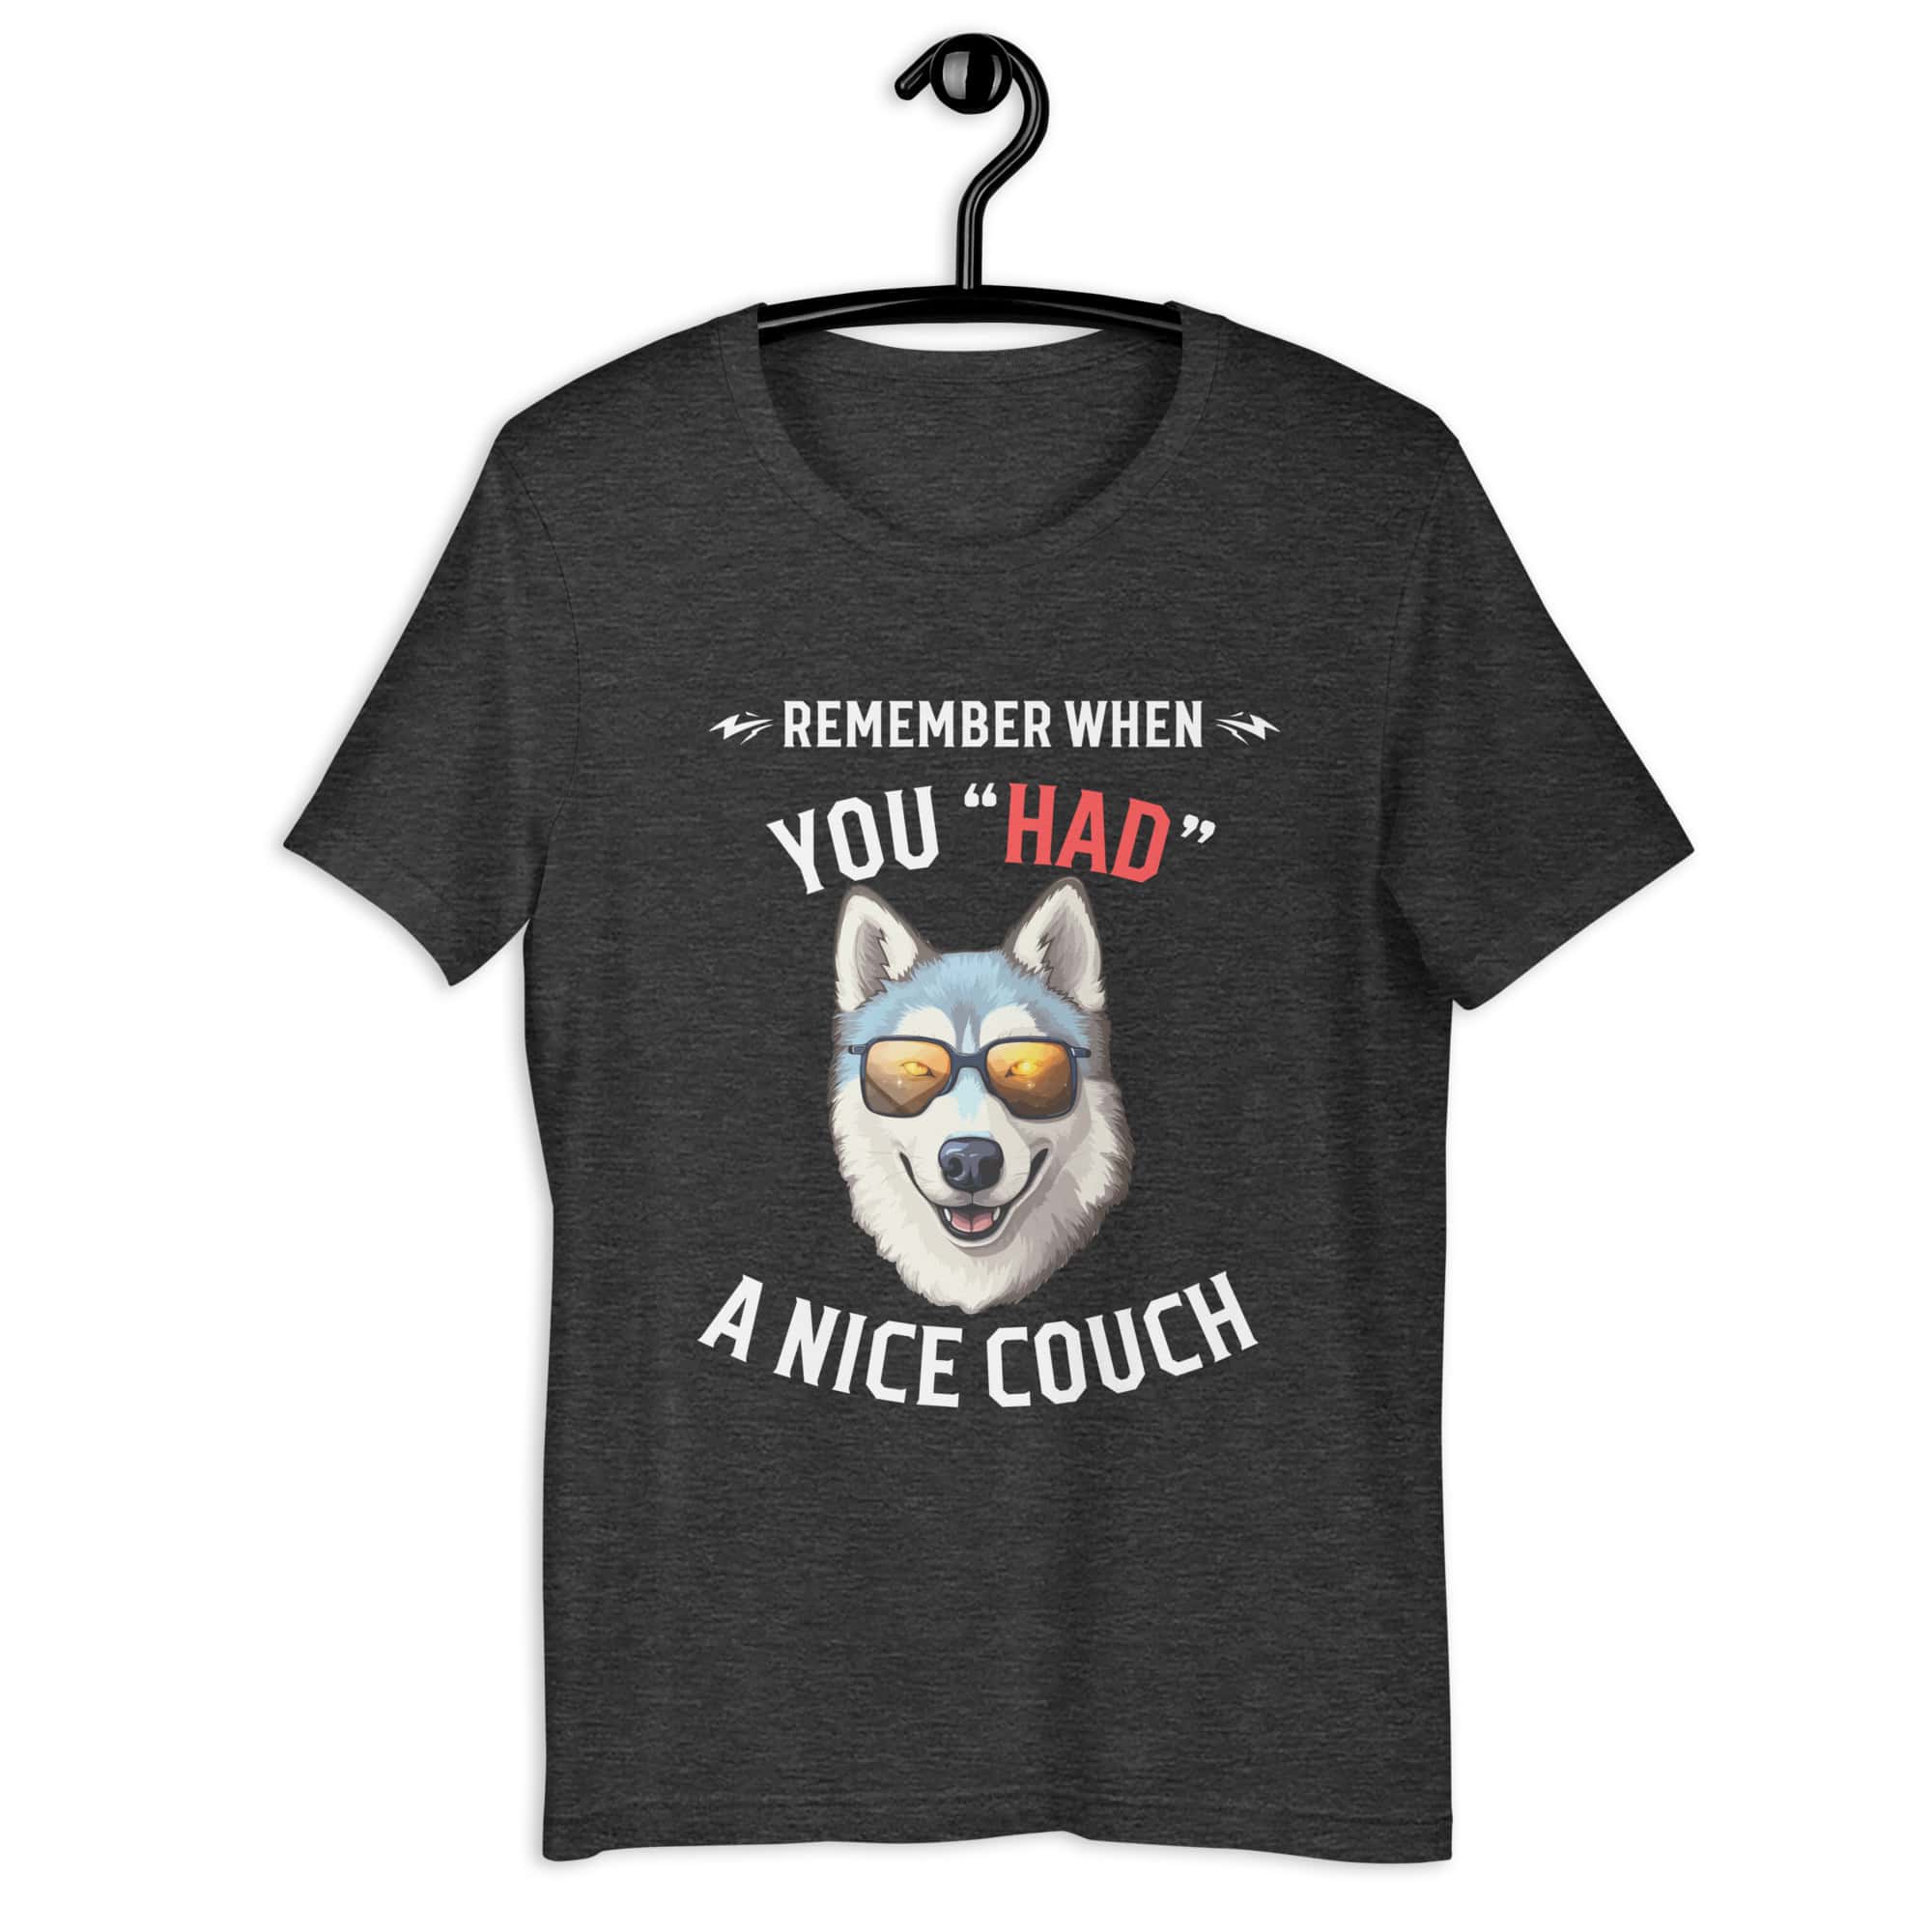 "Remember When You Had A Nice Couch" Husky Unisex T-Shirt matte black